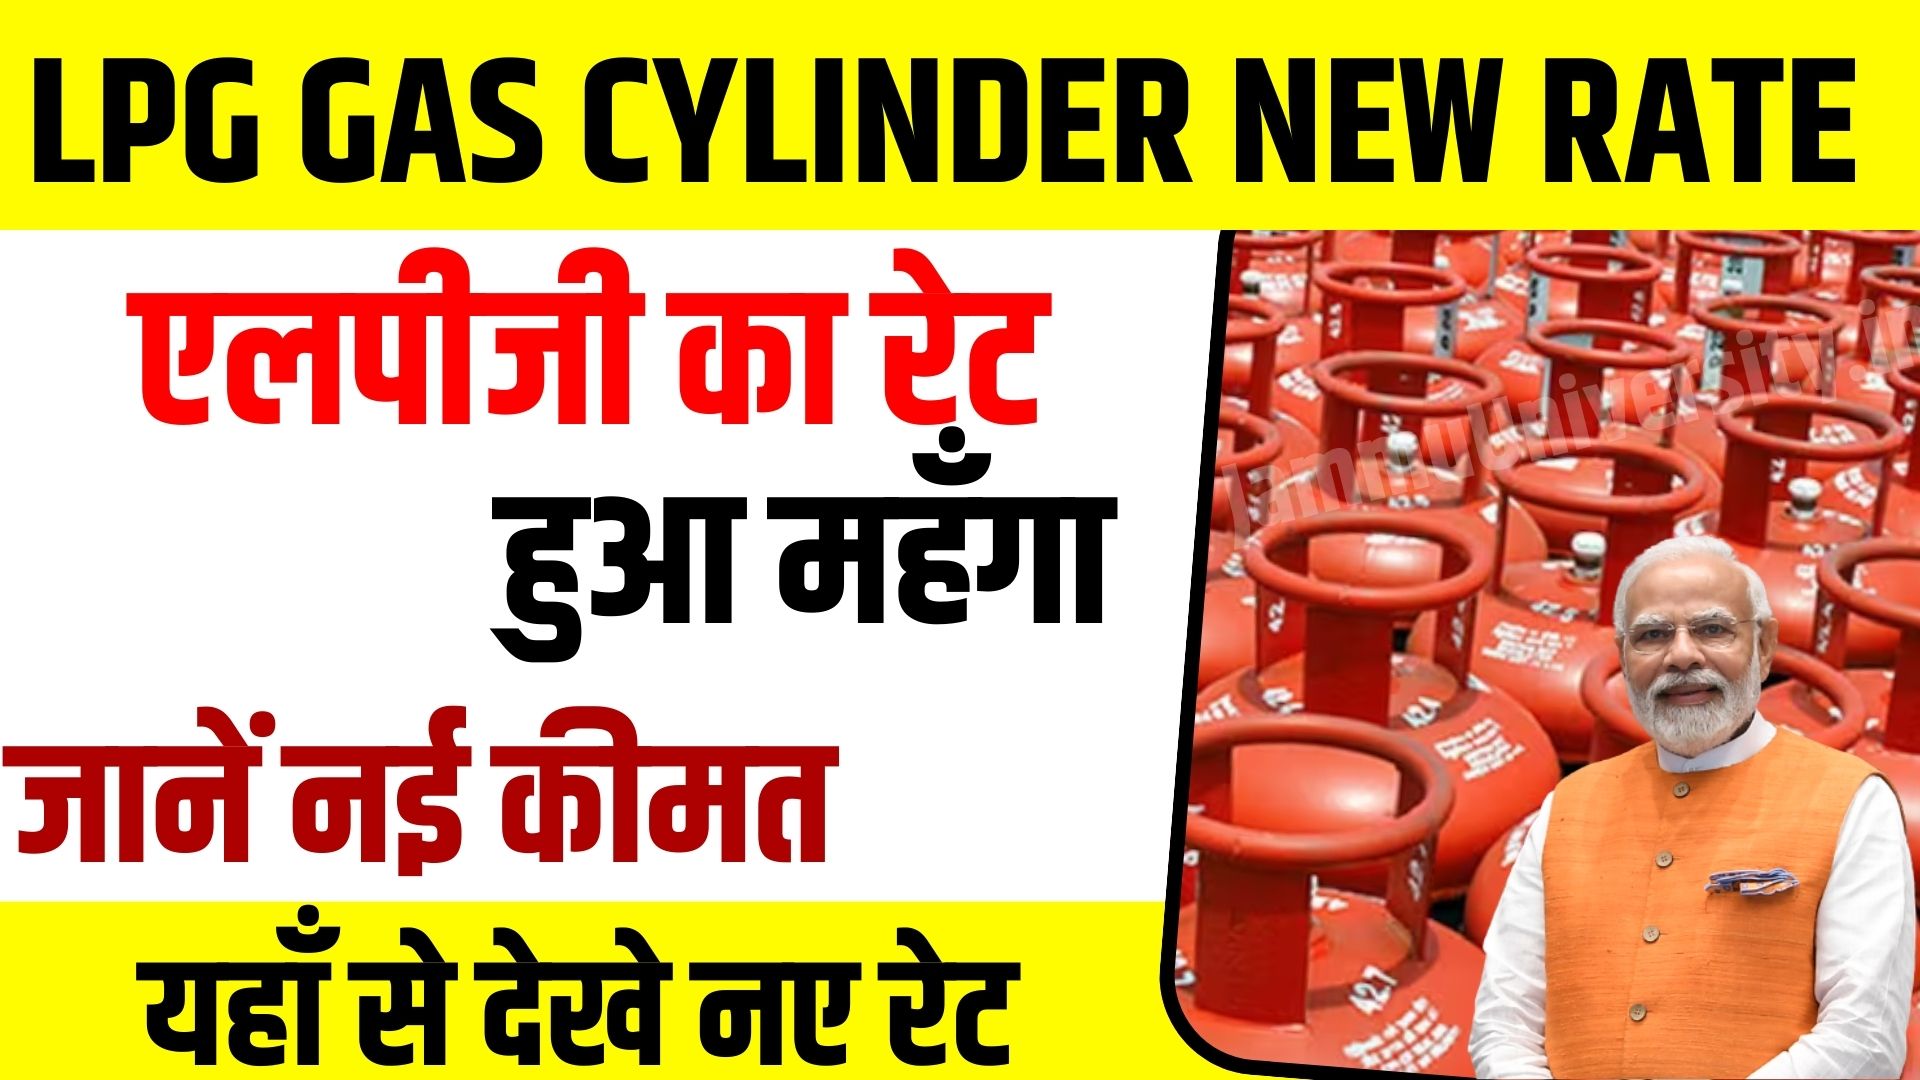 LPG Cylinder New Rate